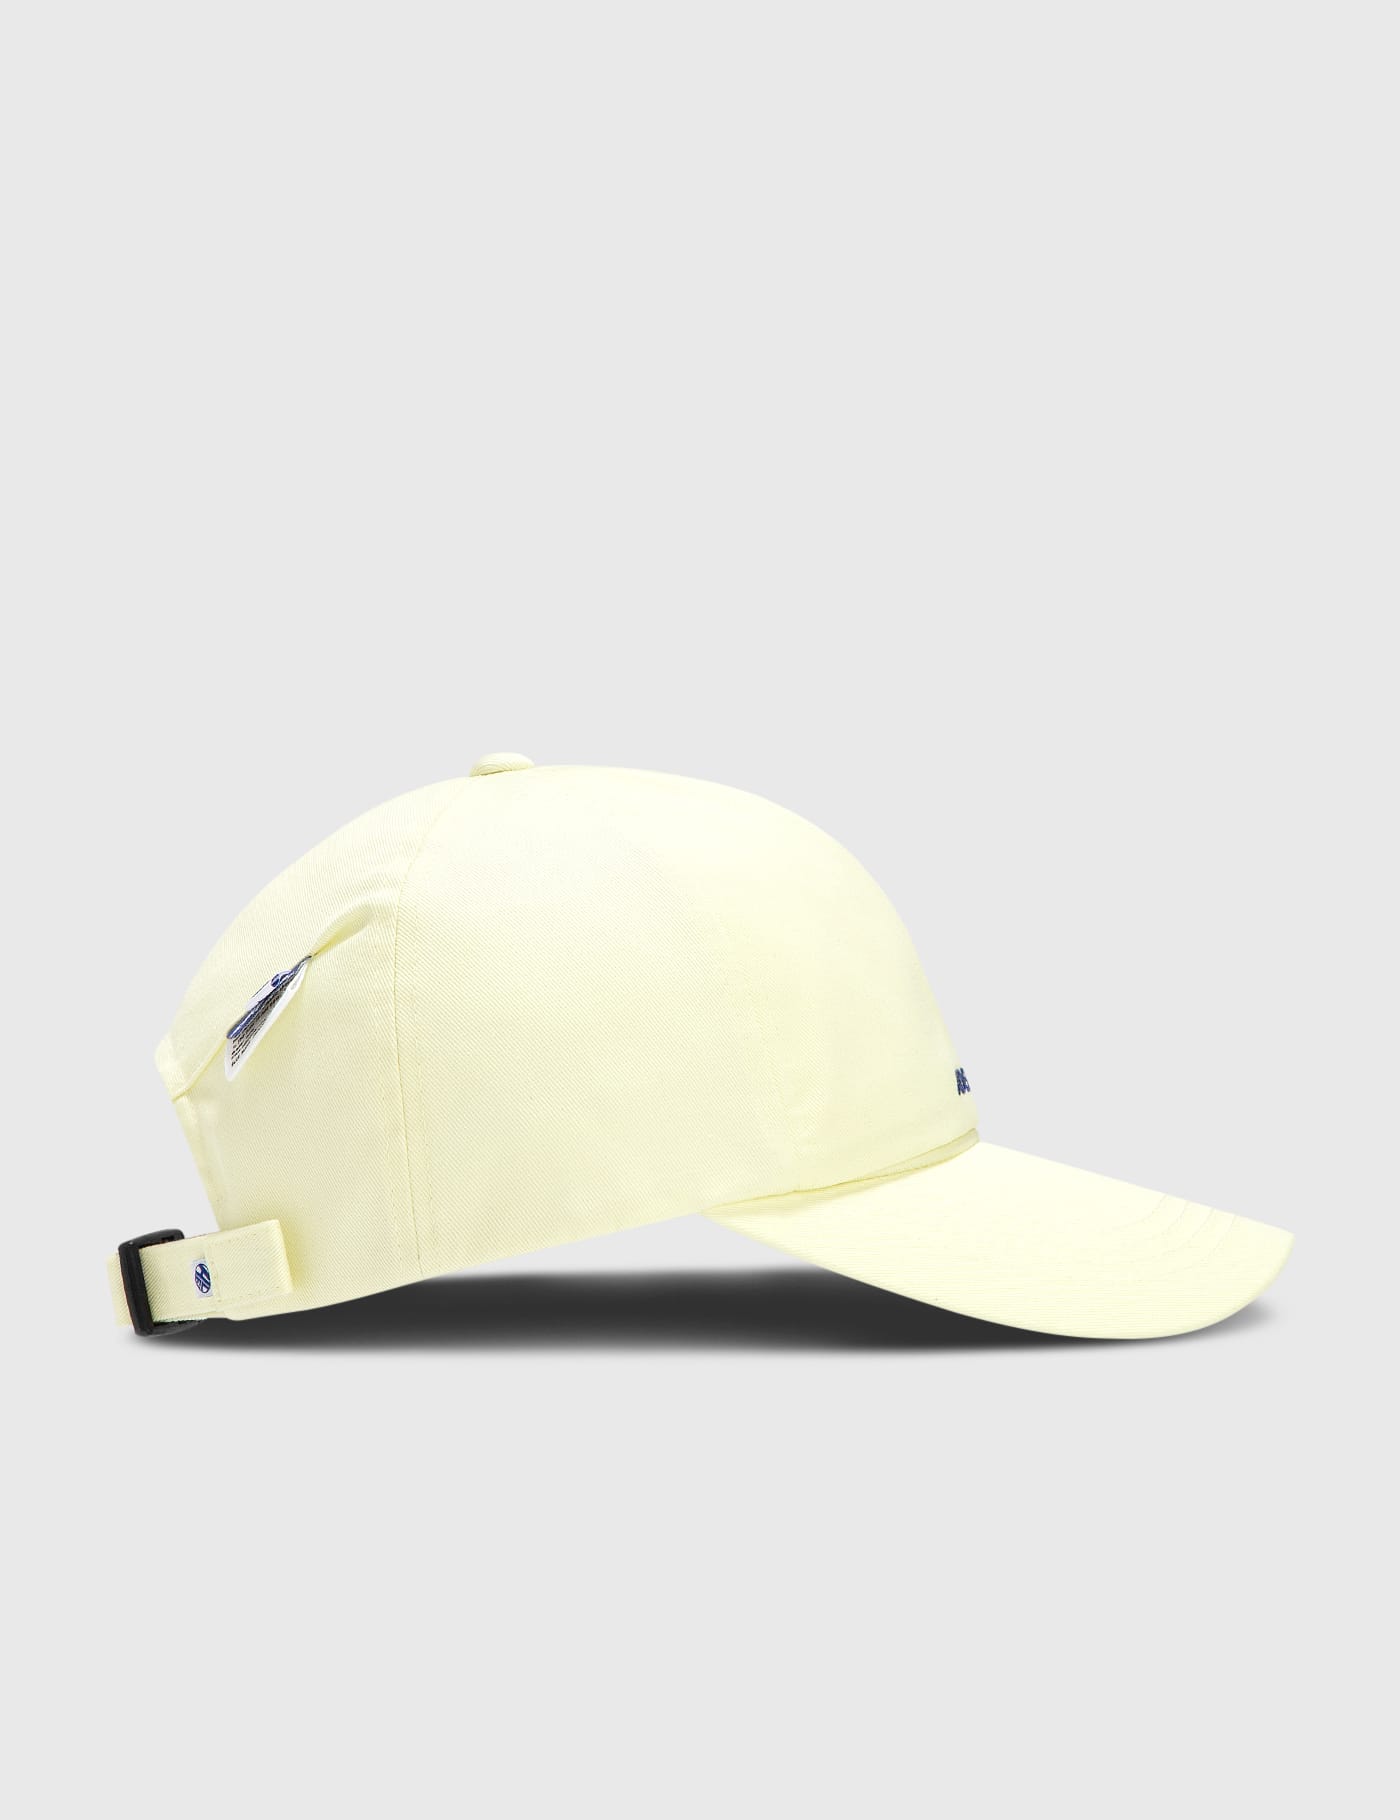 Ader Error - Standic Logo Cap | HBX - Globally Curated Fashion and ...